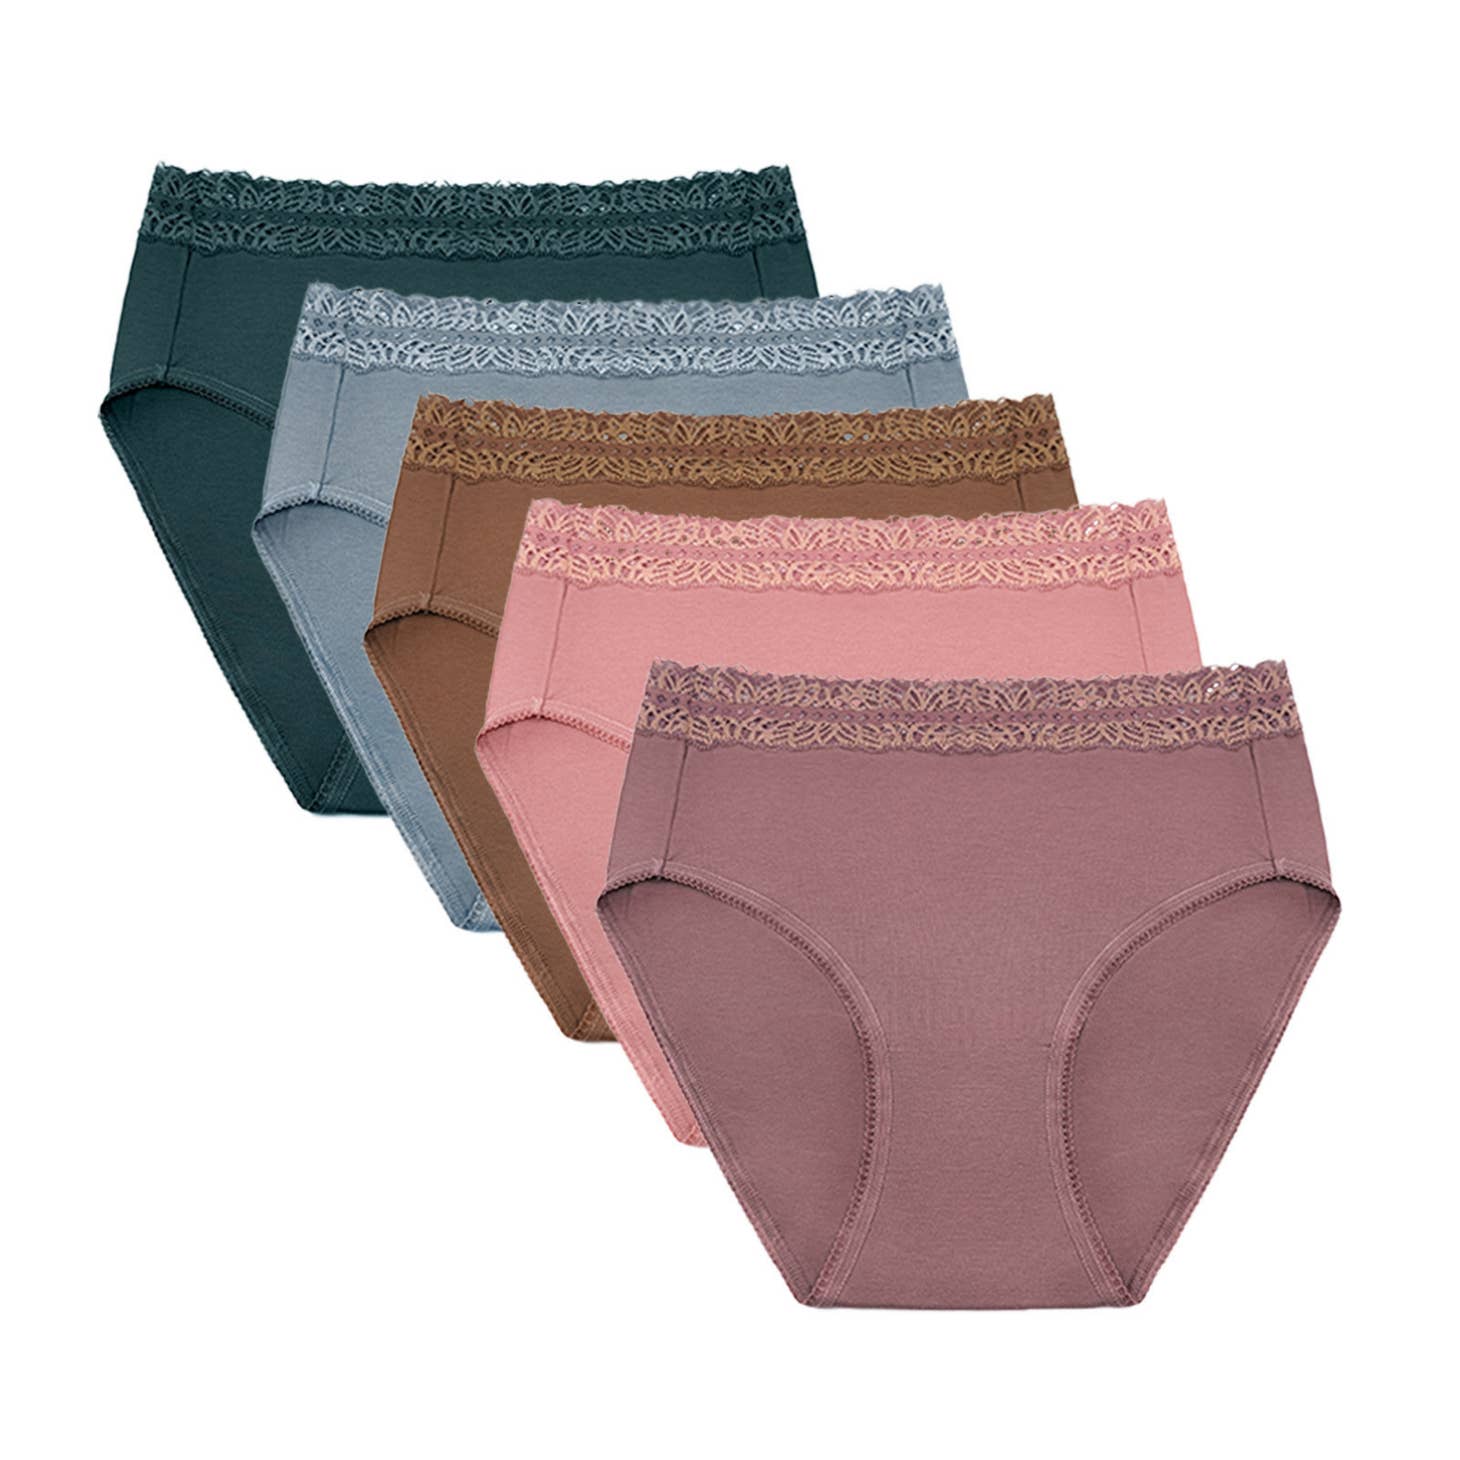 High-Waisted Postpartum Recovery Panties - Dusty Hues